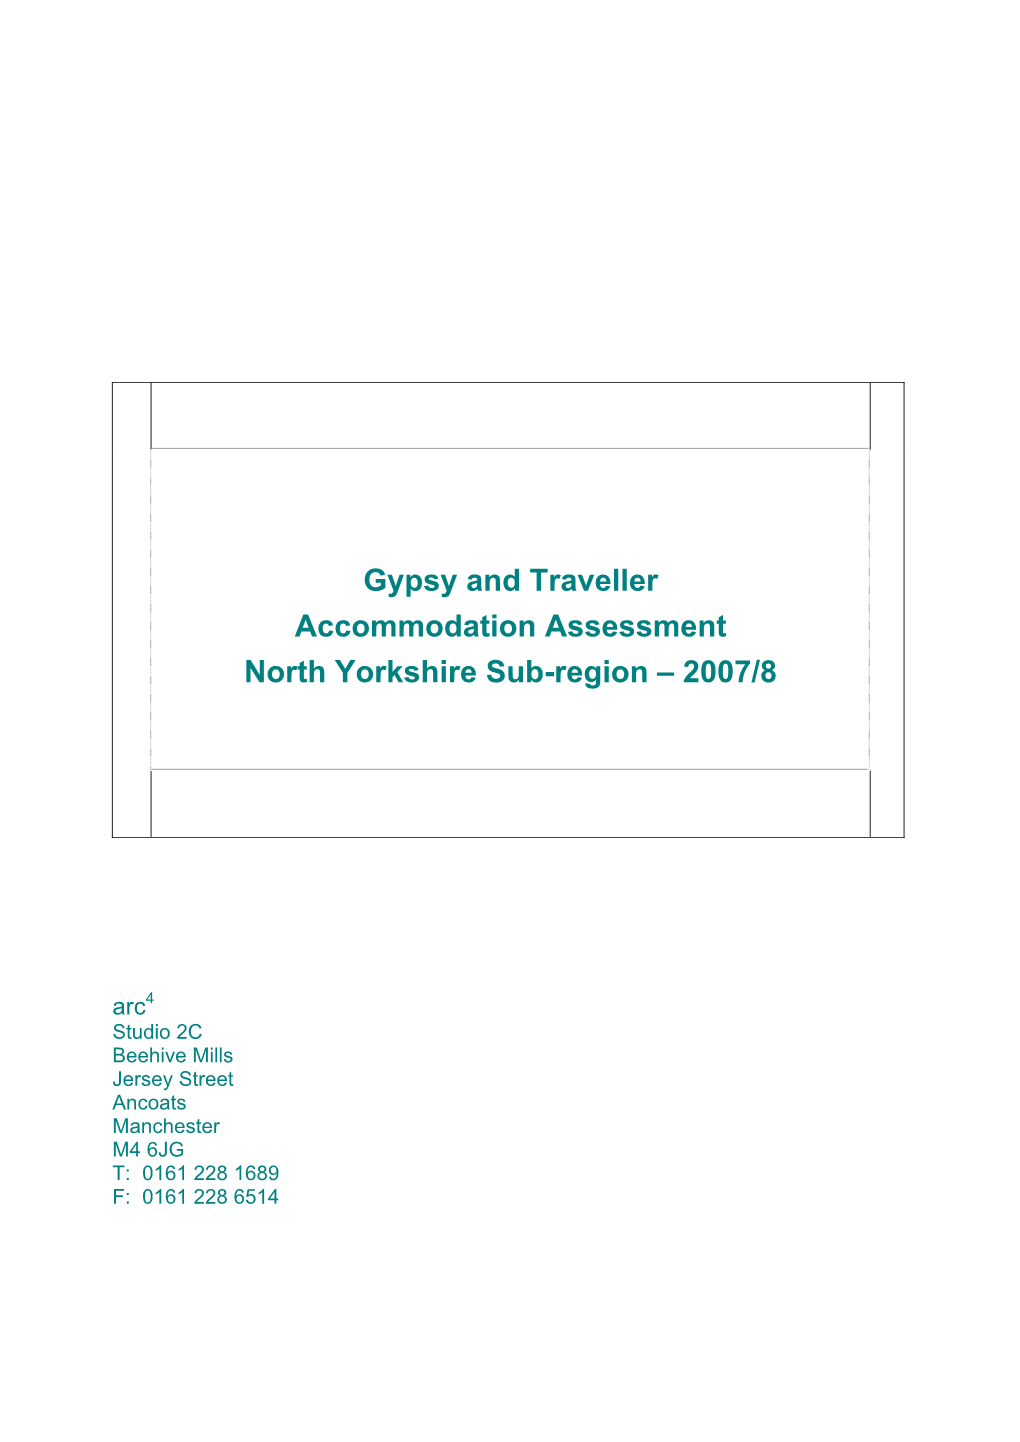 2008 Gypsy and Traveller Accommodation Assessment